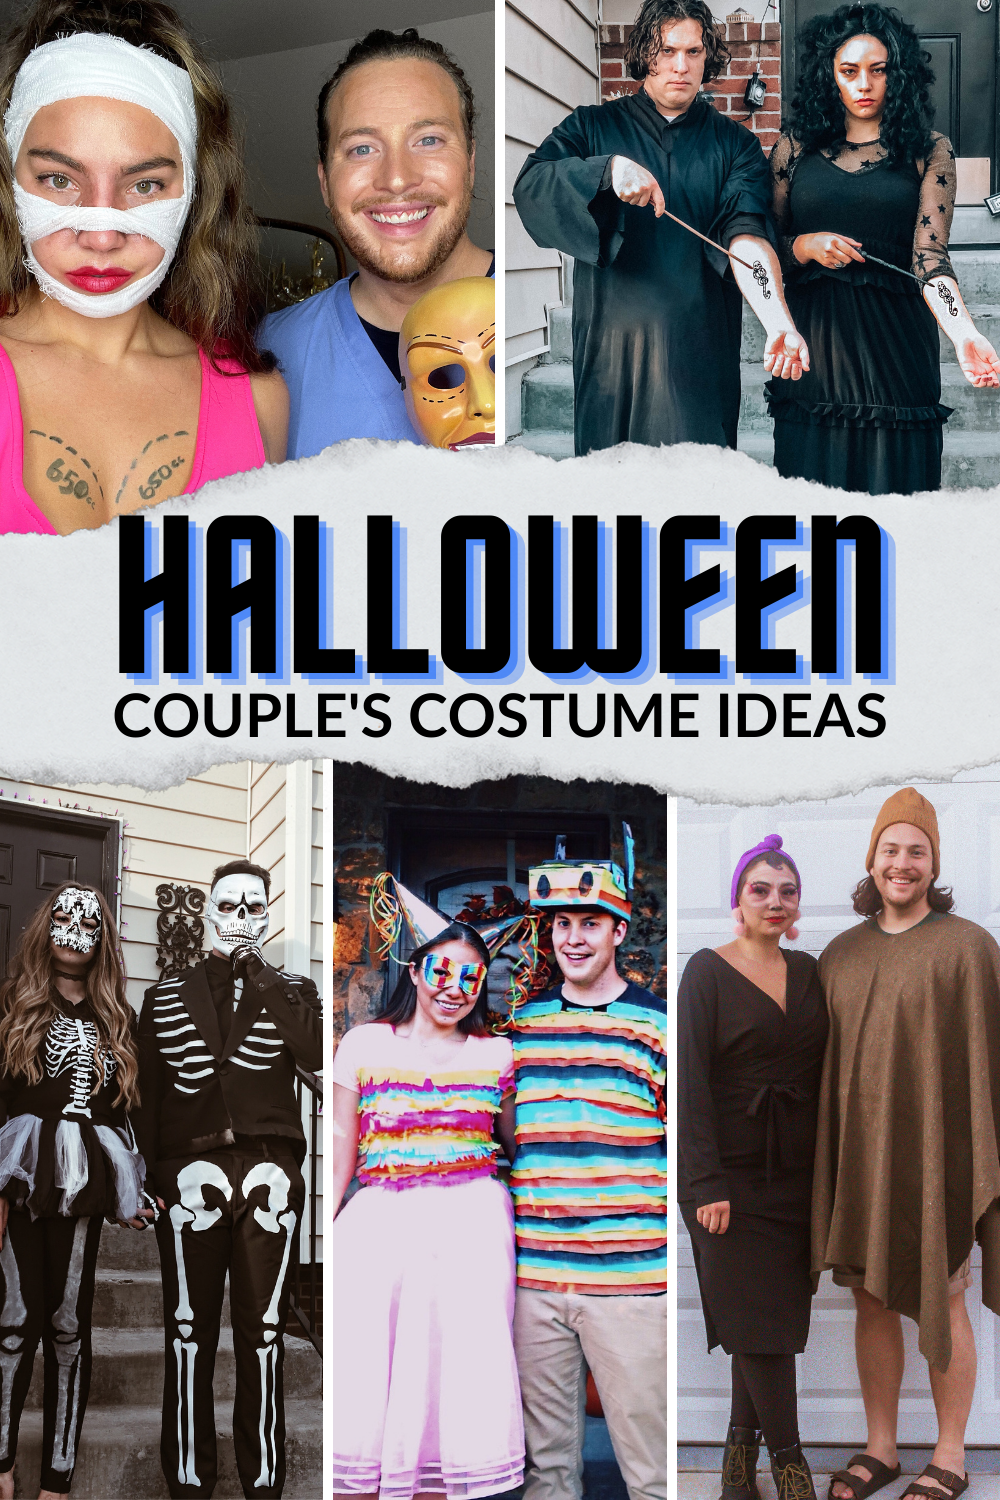 collage of 5 photos showing a man and a woman dressed up different ways. the image says "halloween couples's costume ideas"